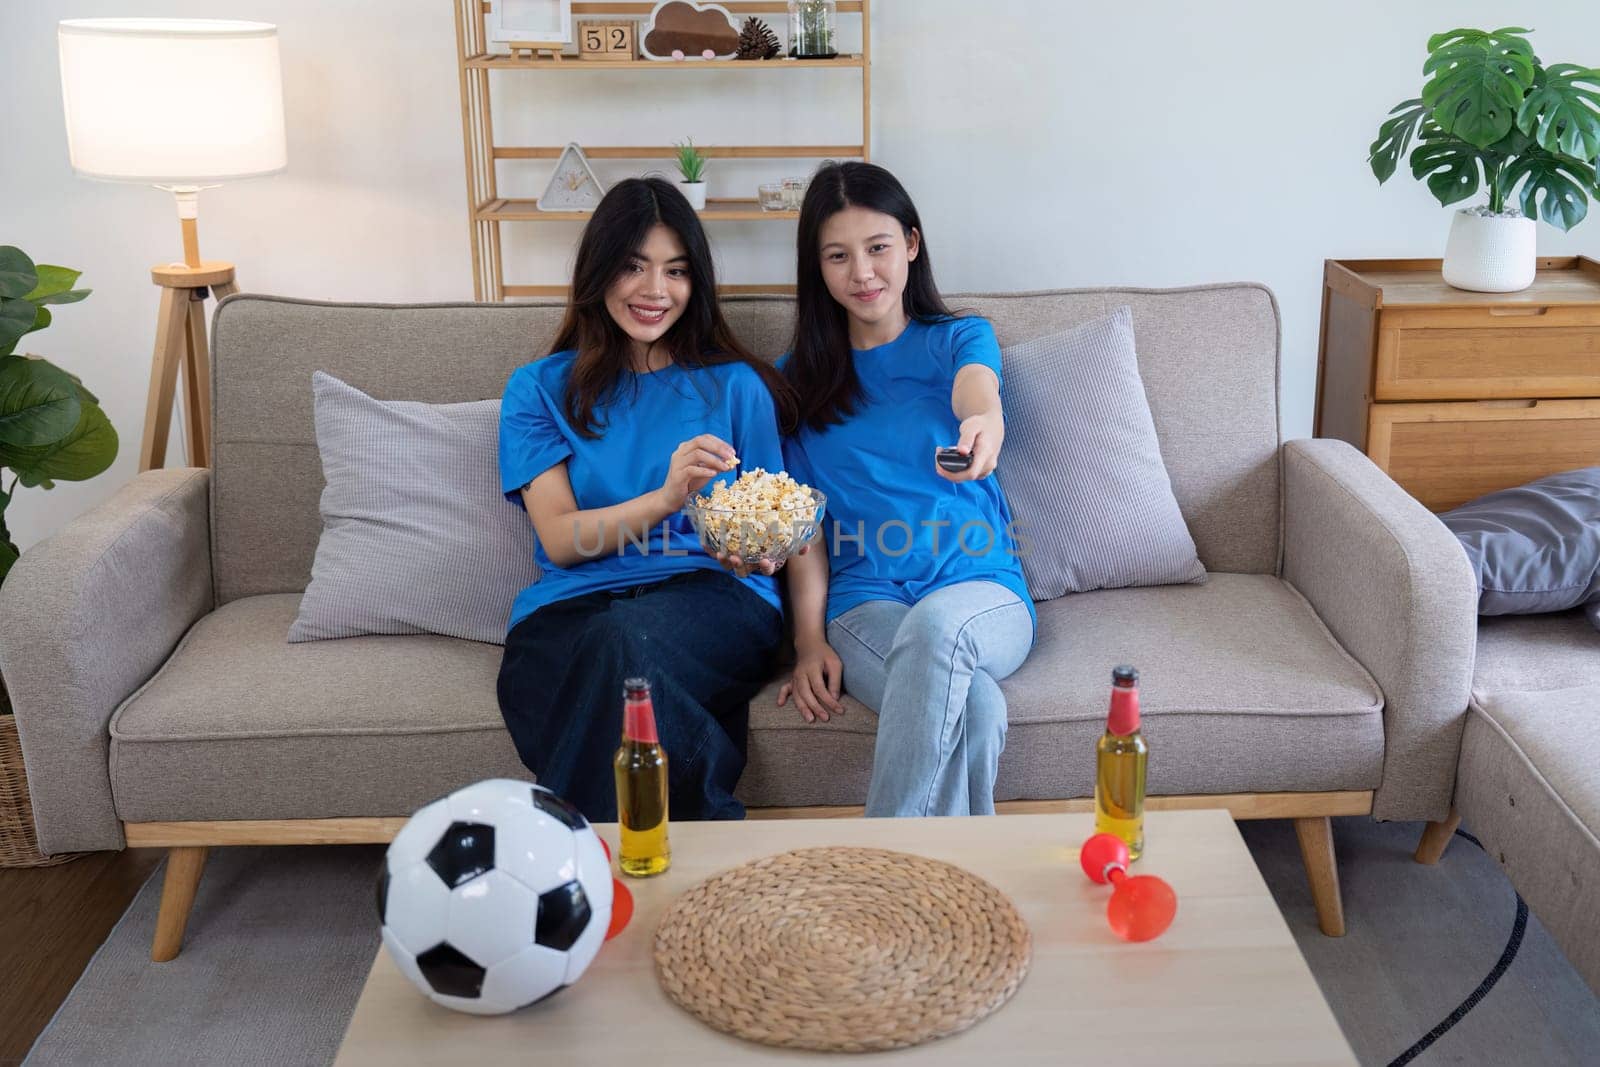 Lesbian couple cheering for Euro football at home with snacks and drinks. Concept of LGBTQ pride, sports enthusiasm, and domestic leisure.